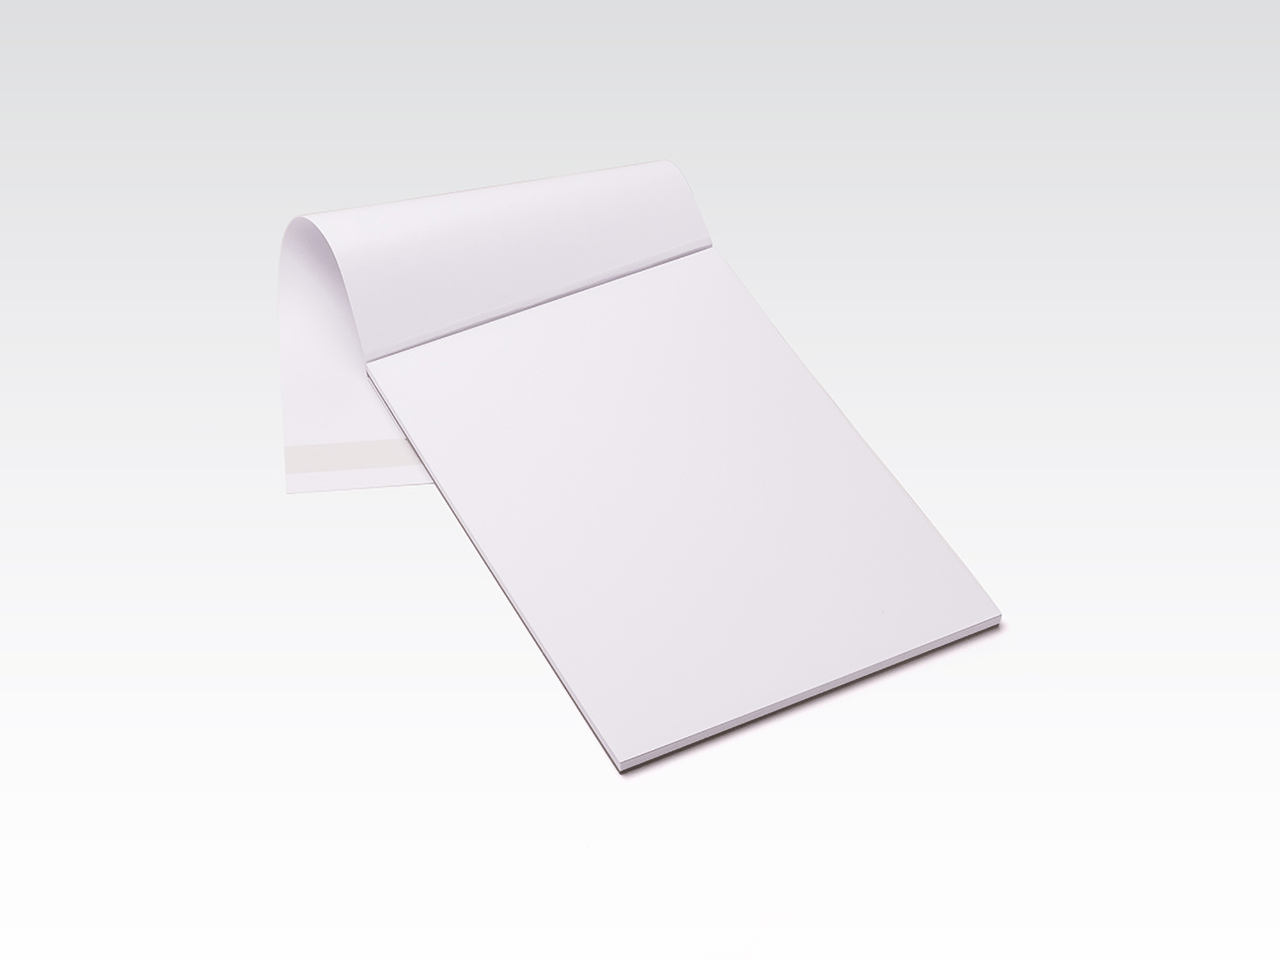 Fabriano White White Pad 8x8 300gsm 20 pages - Meininger Art Supply